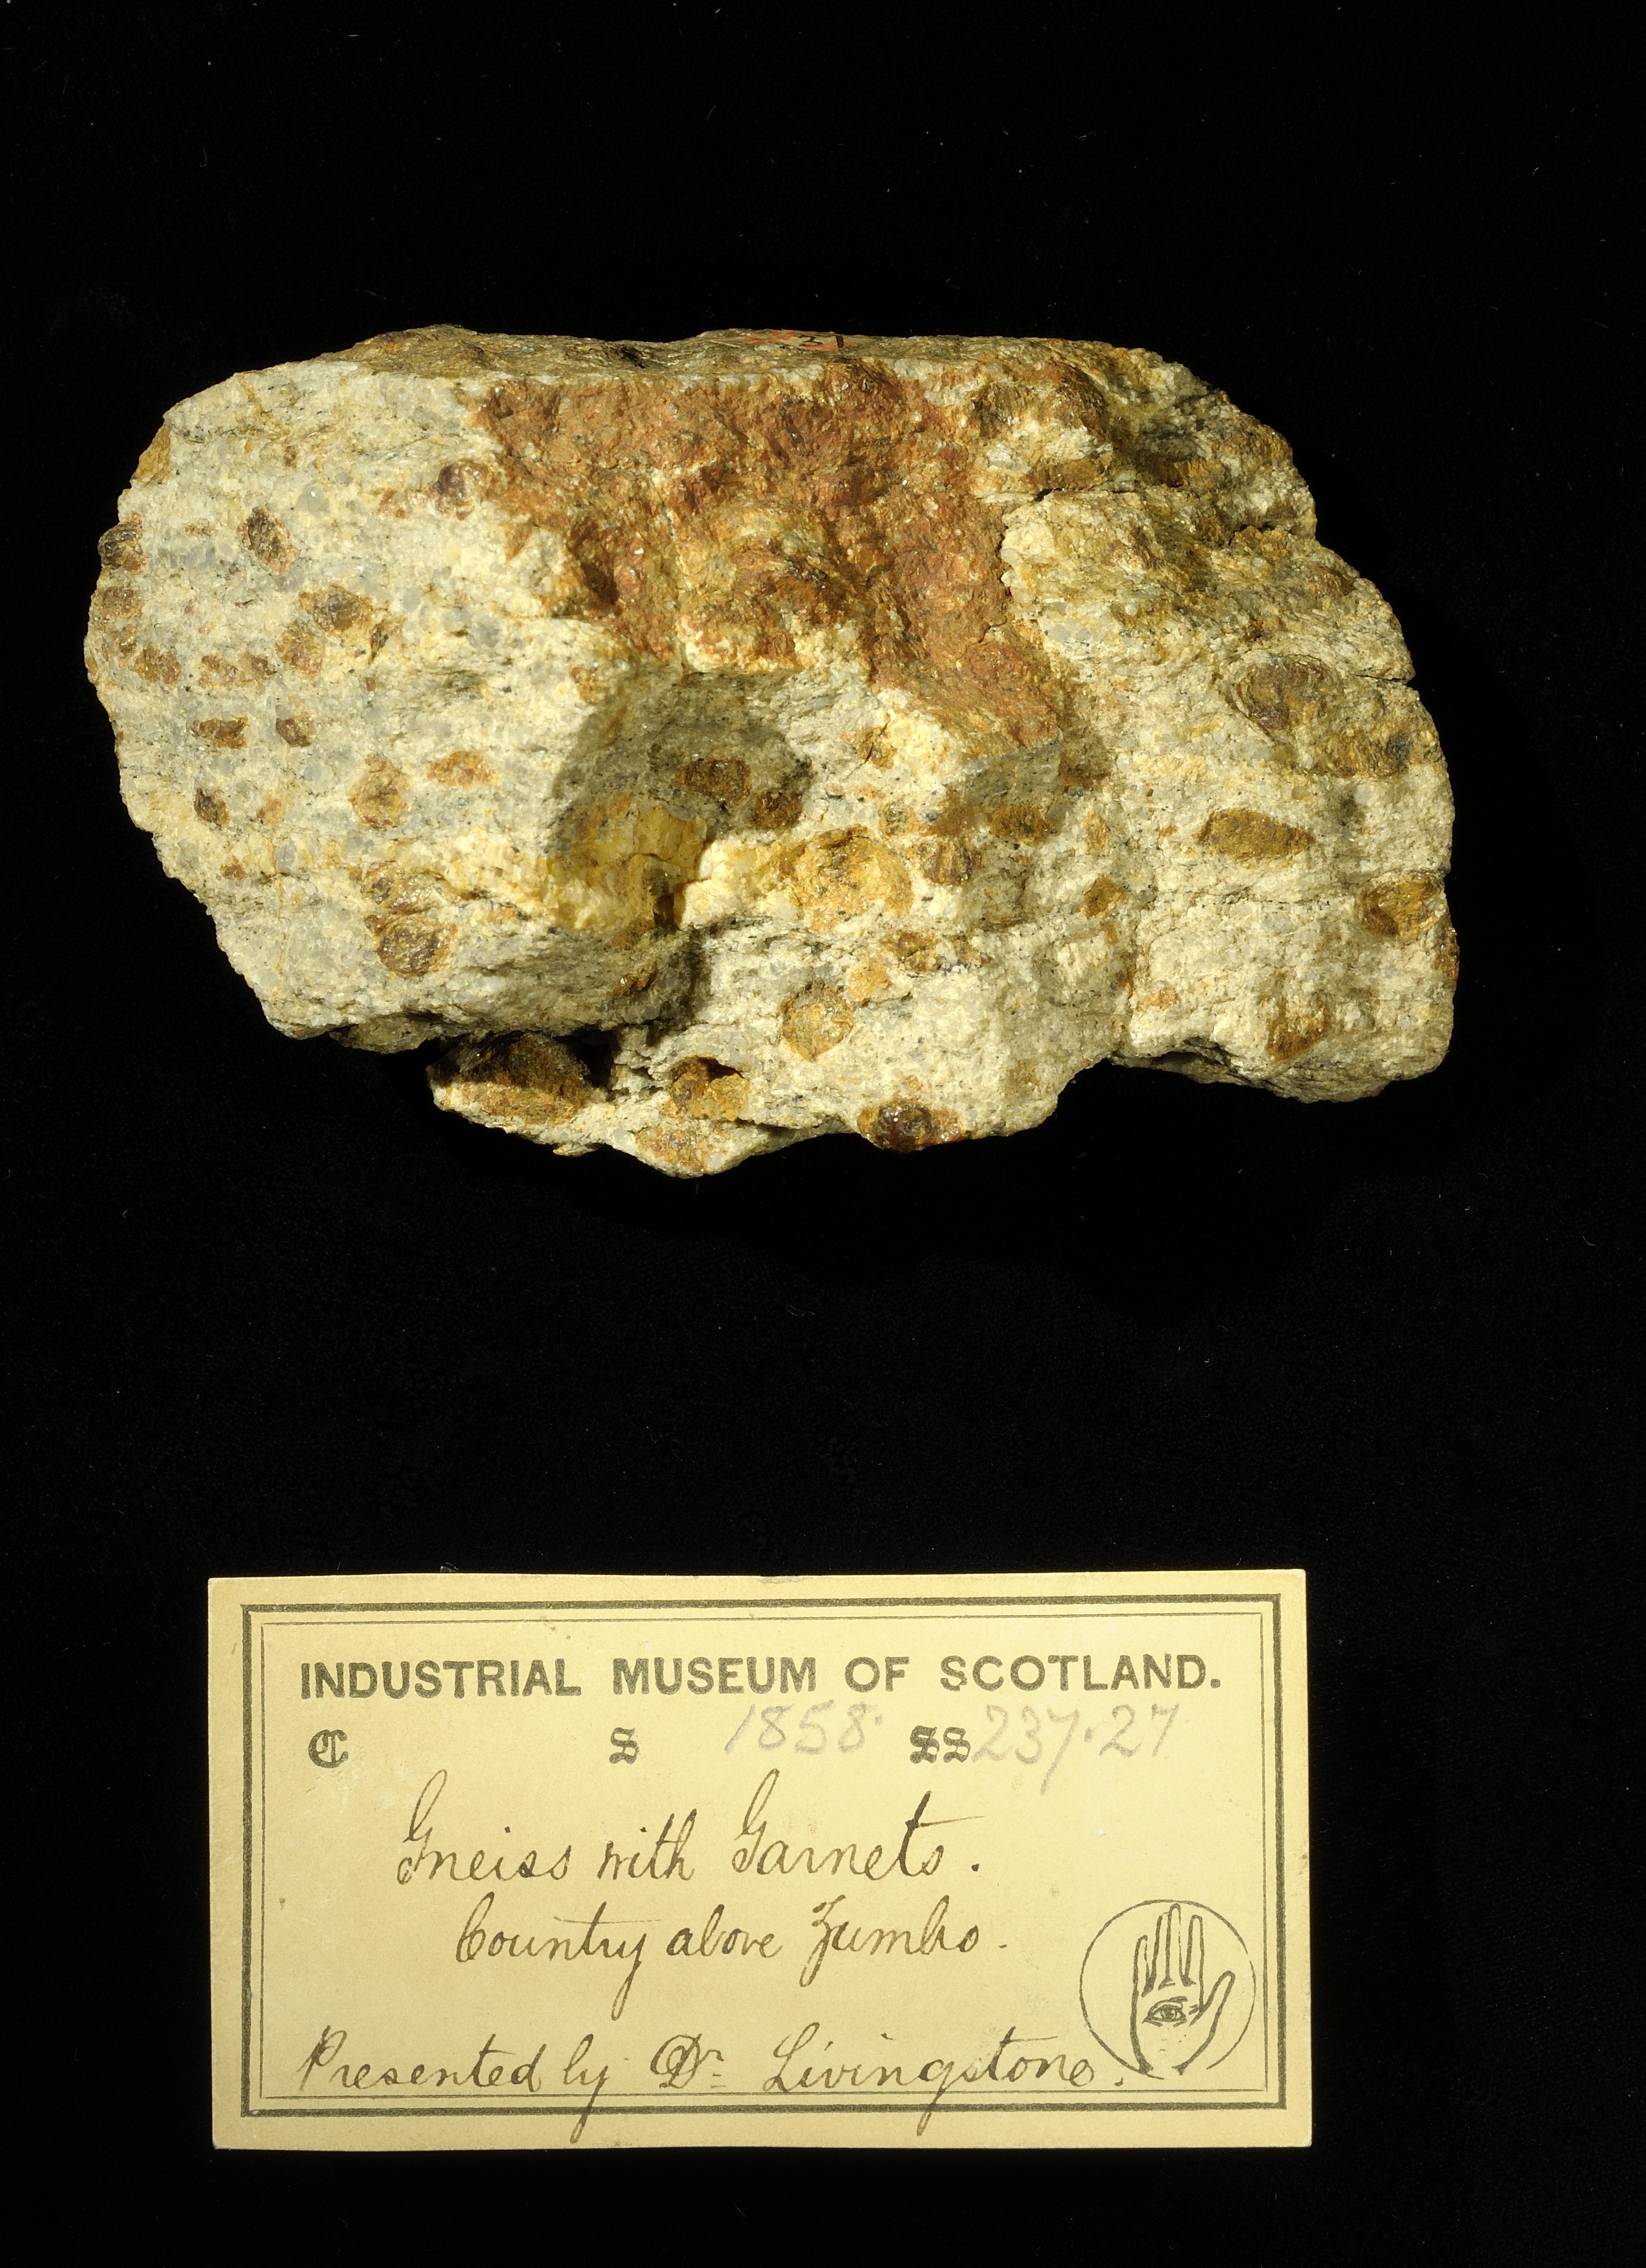 Specimen of gneiss with 19th century museum label: ‘Gneiss with garnets. Country above Zumbo. Presented by Dr Livingstone.’